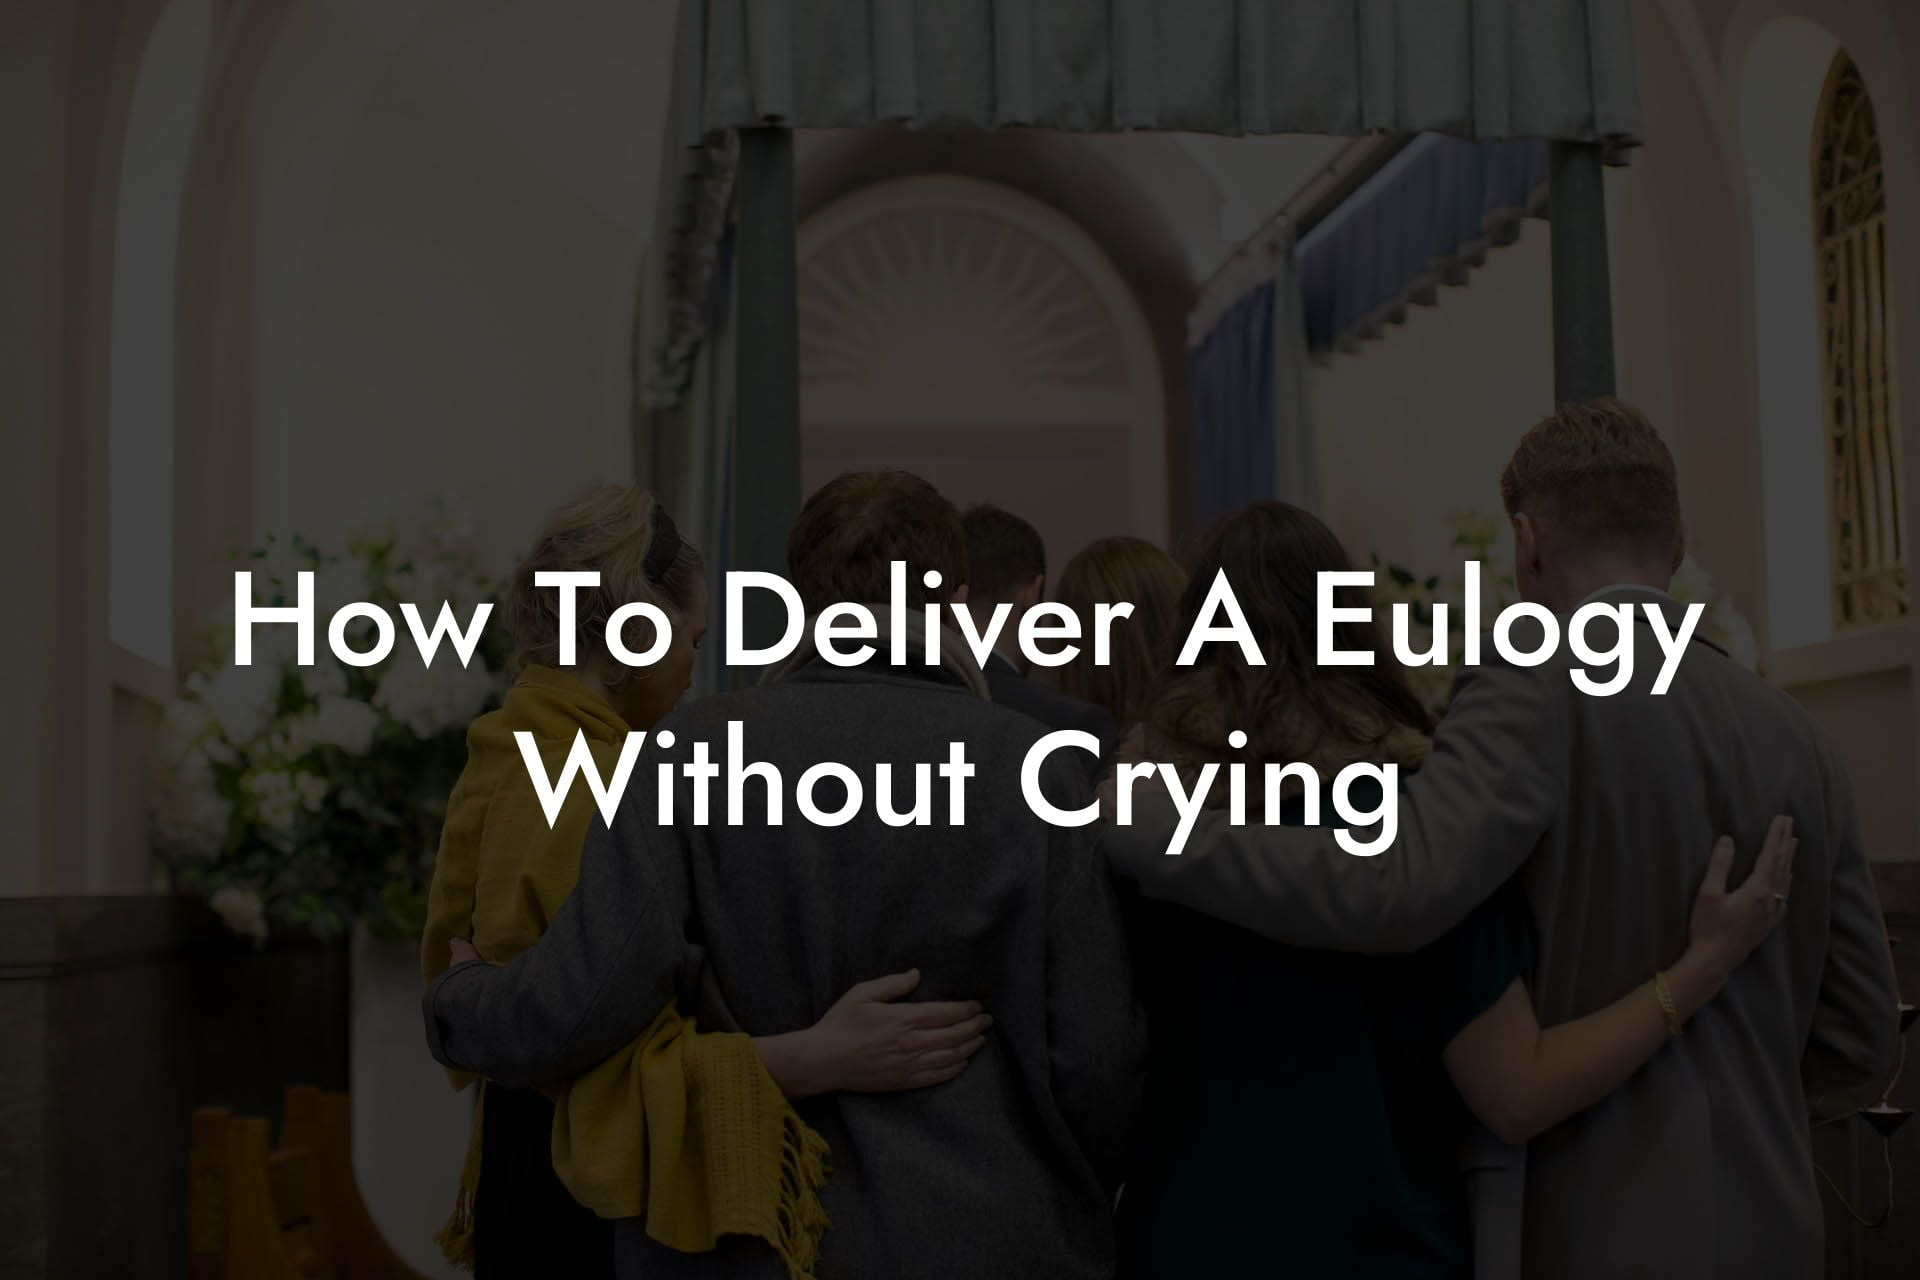 How To Deliver A Eulogy Without Crying